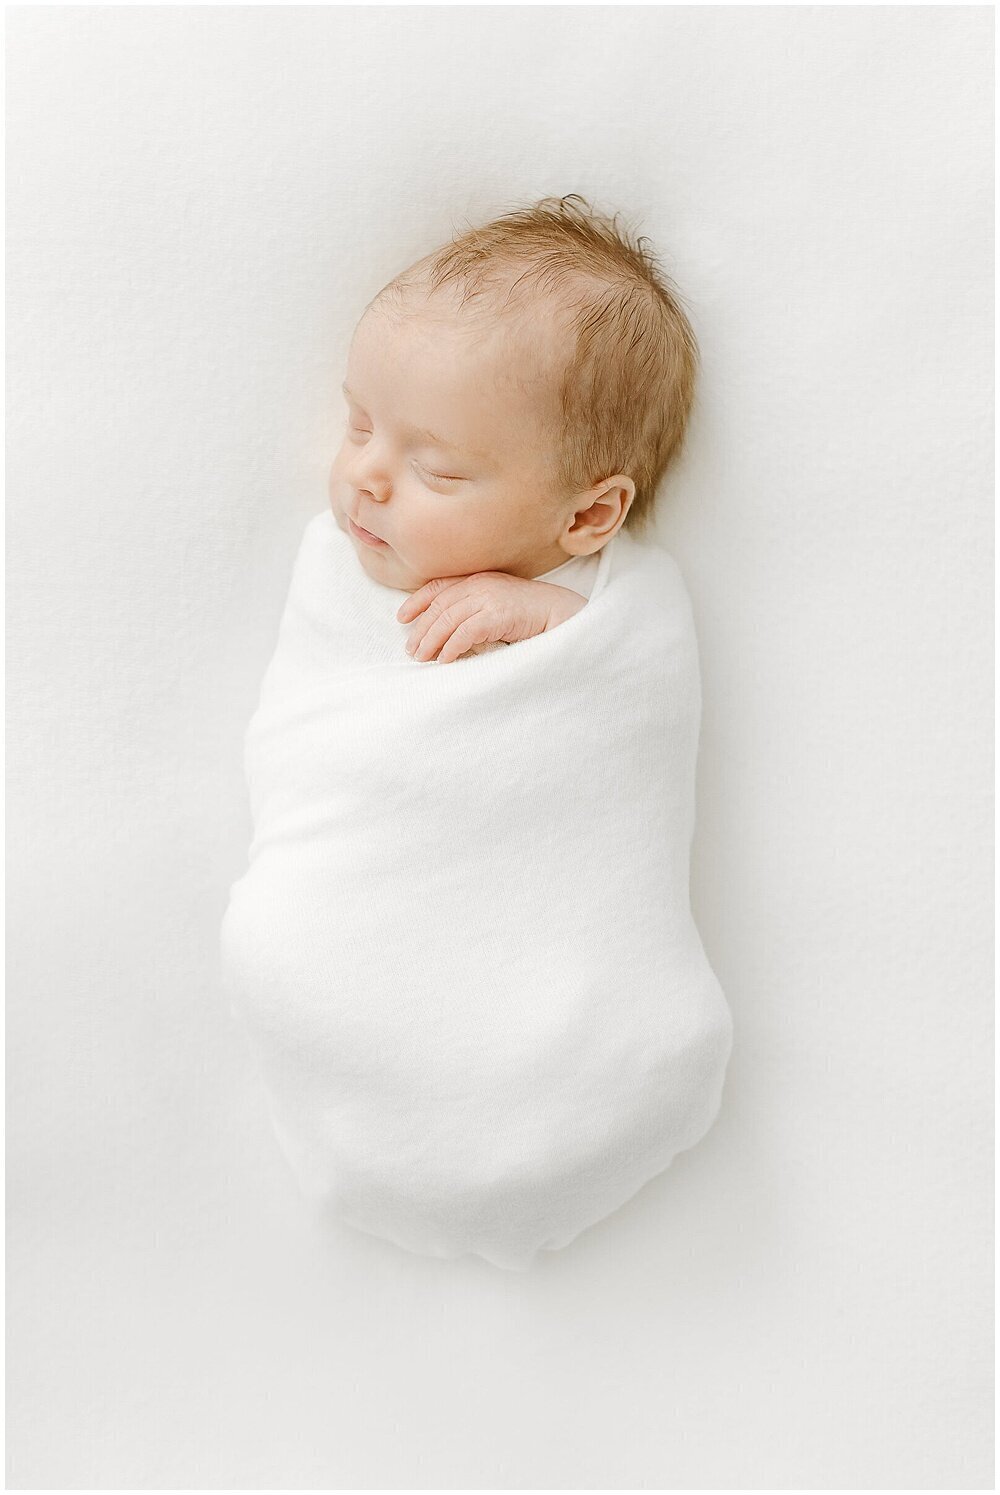 A photo of a baby swaddled in a white blanket by Northern Virginia Newborn Photographer